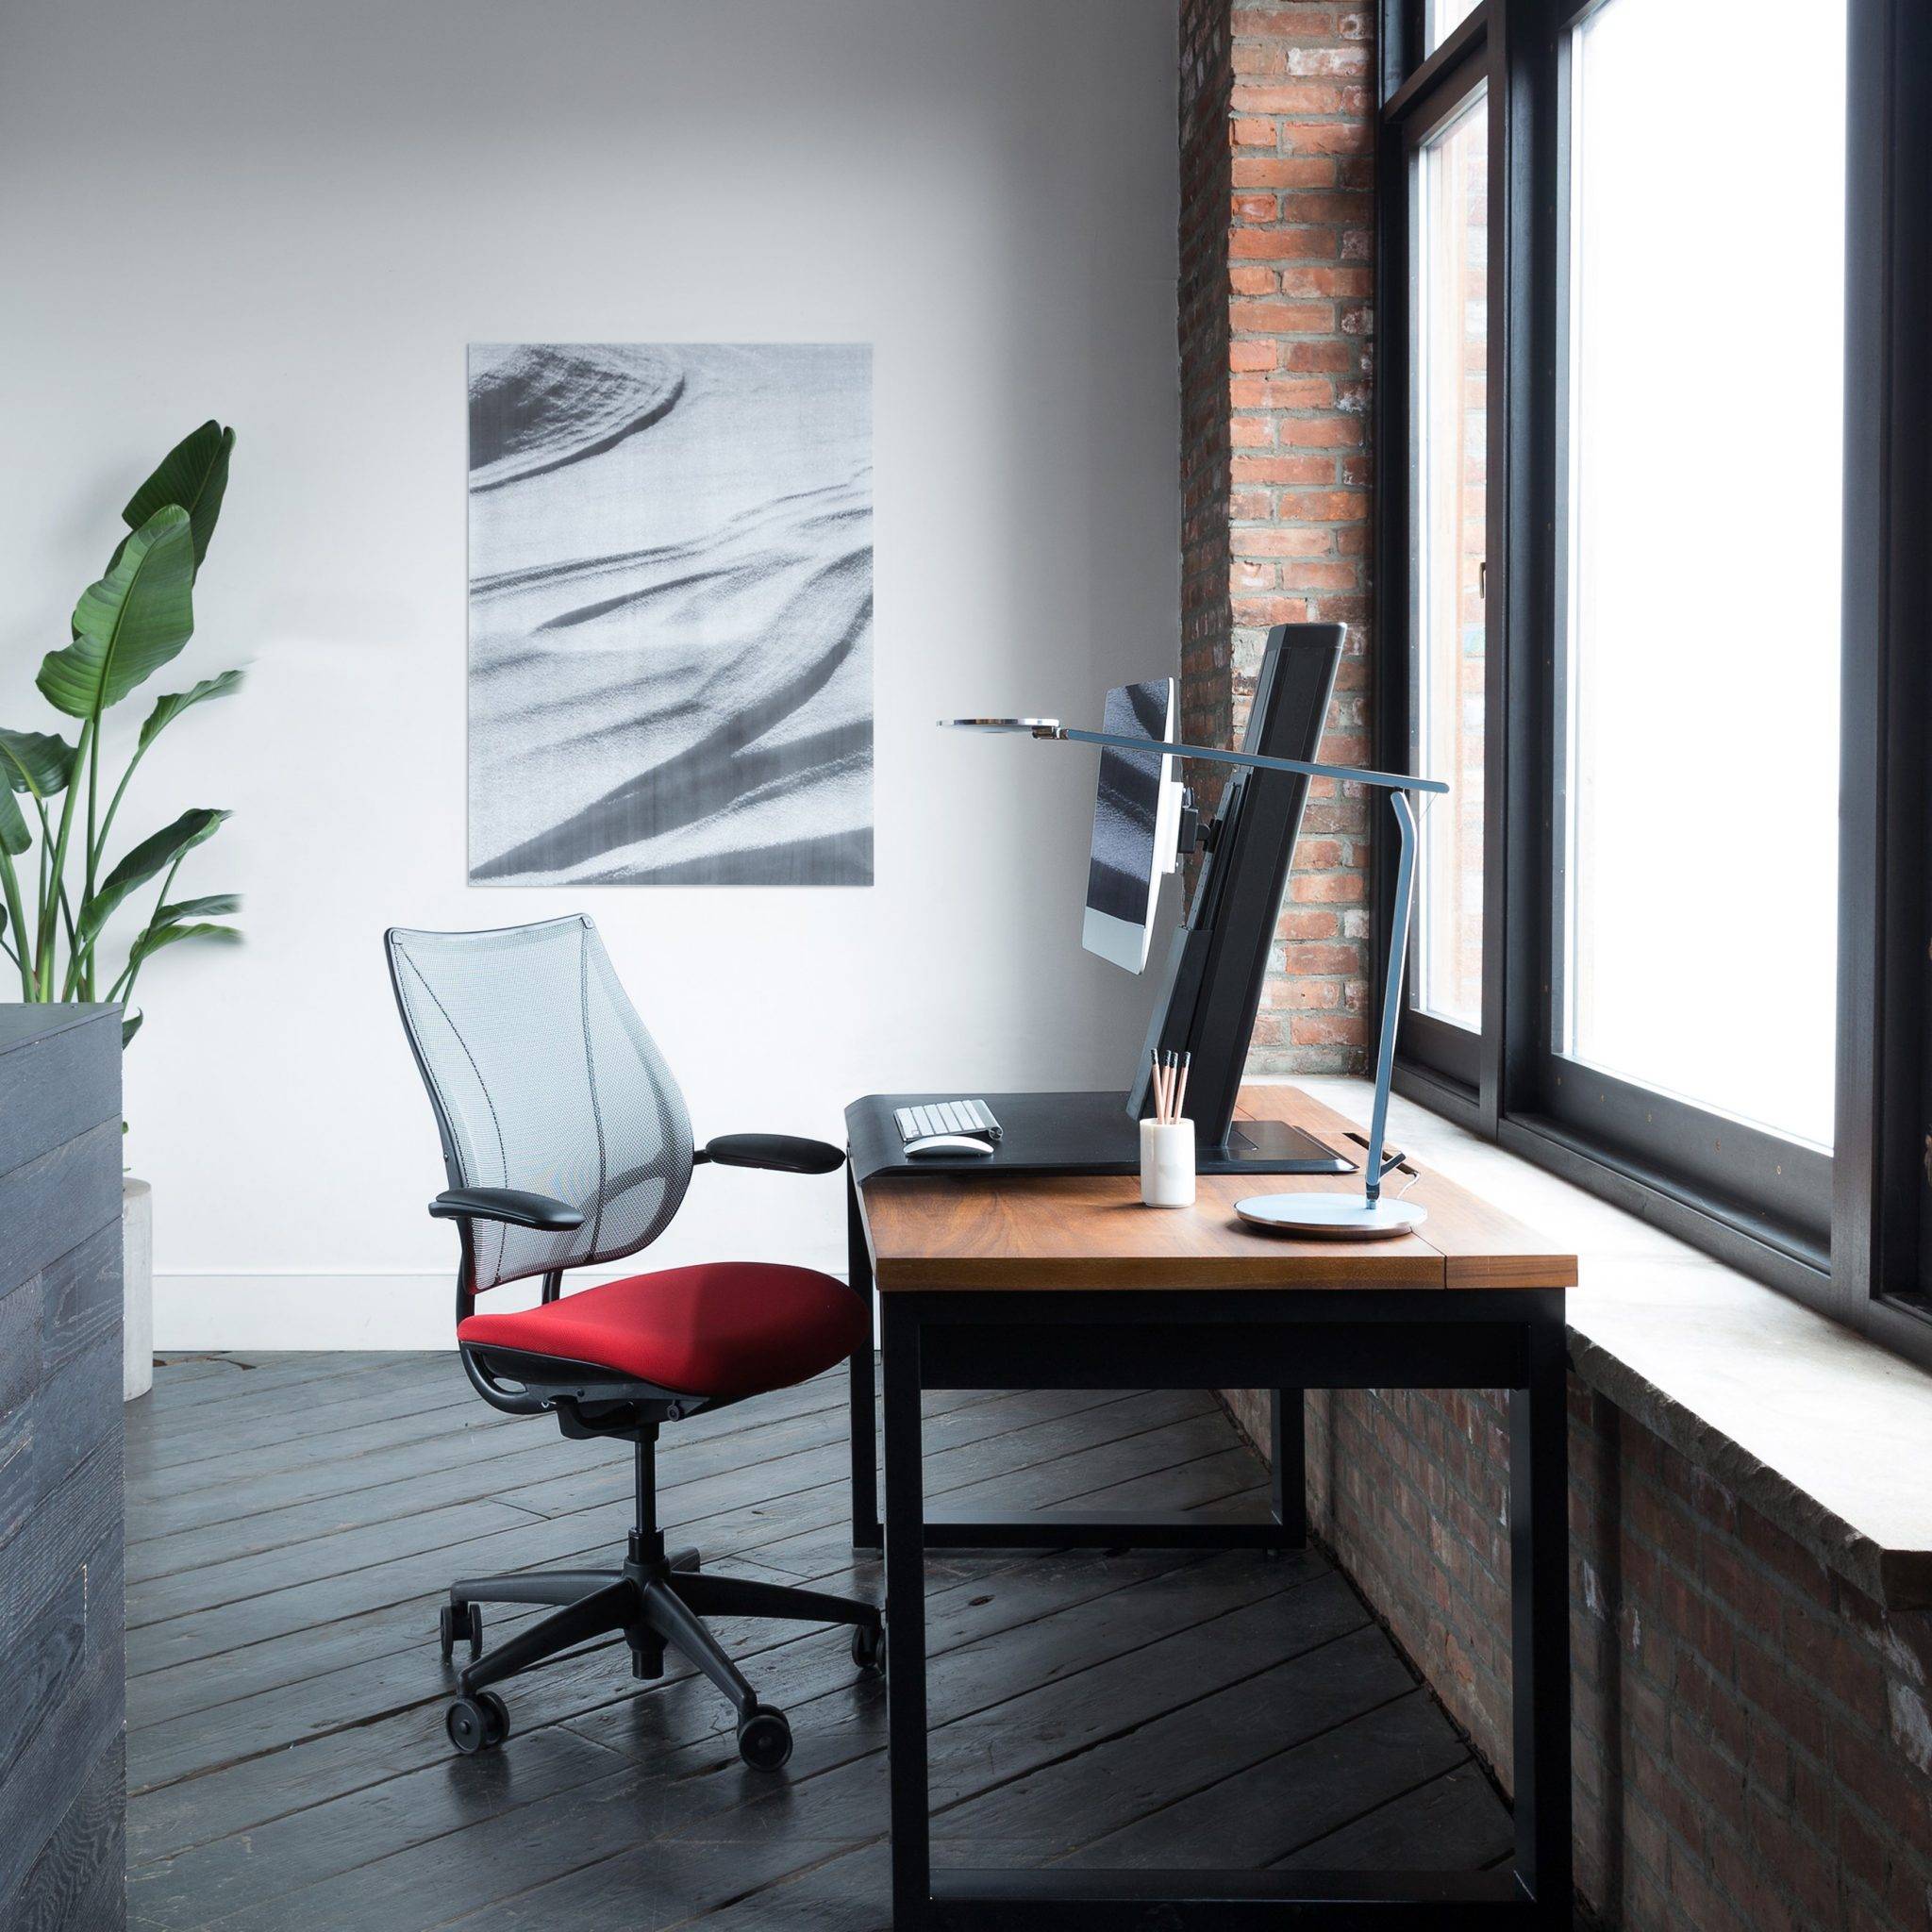 Promotion: Humanscale launch Quickstand Eco to lead next generation of sit/stand workstations